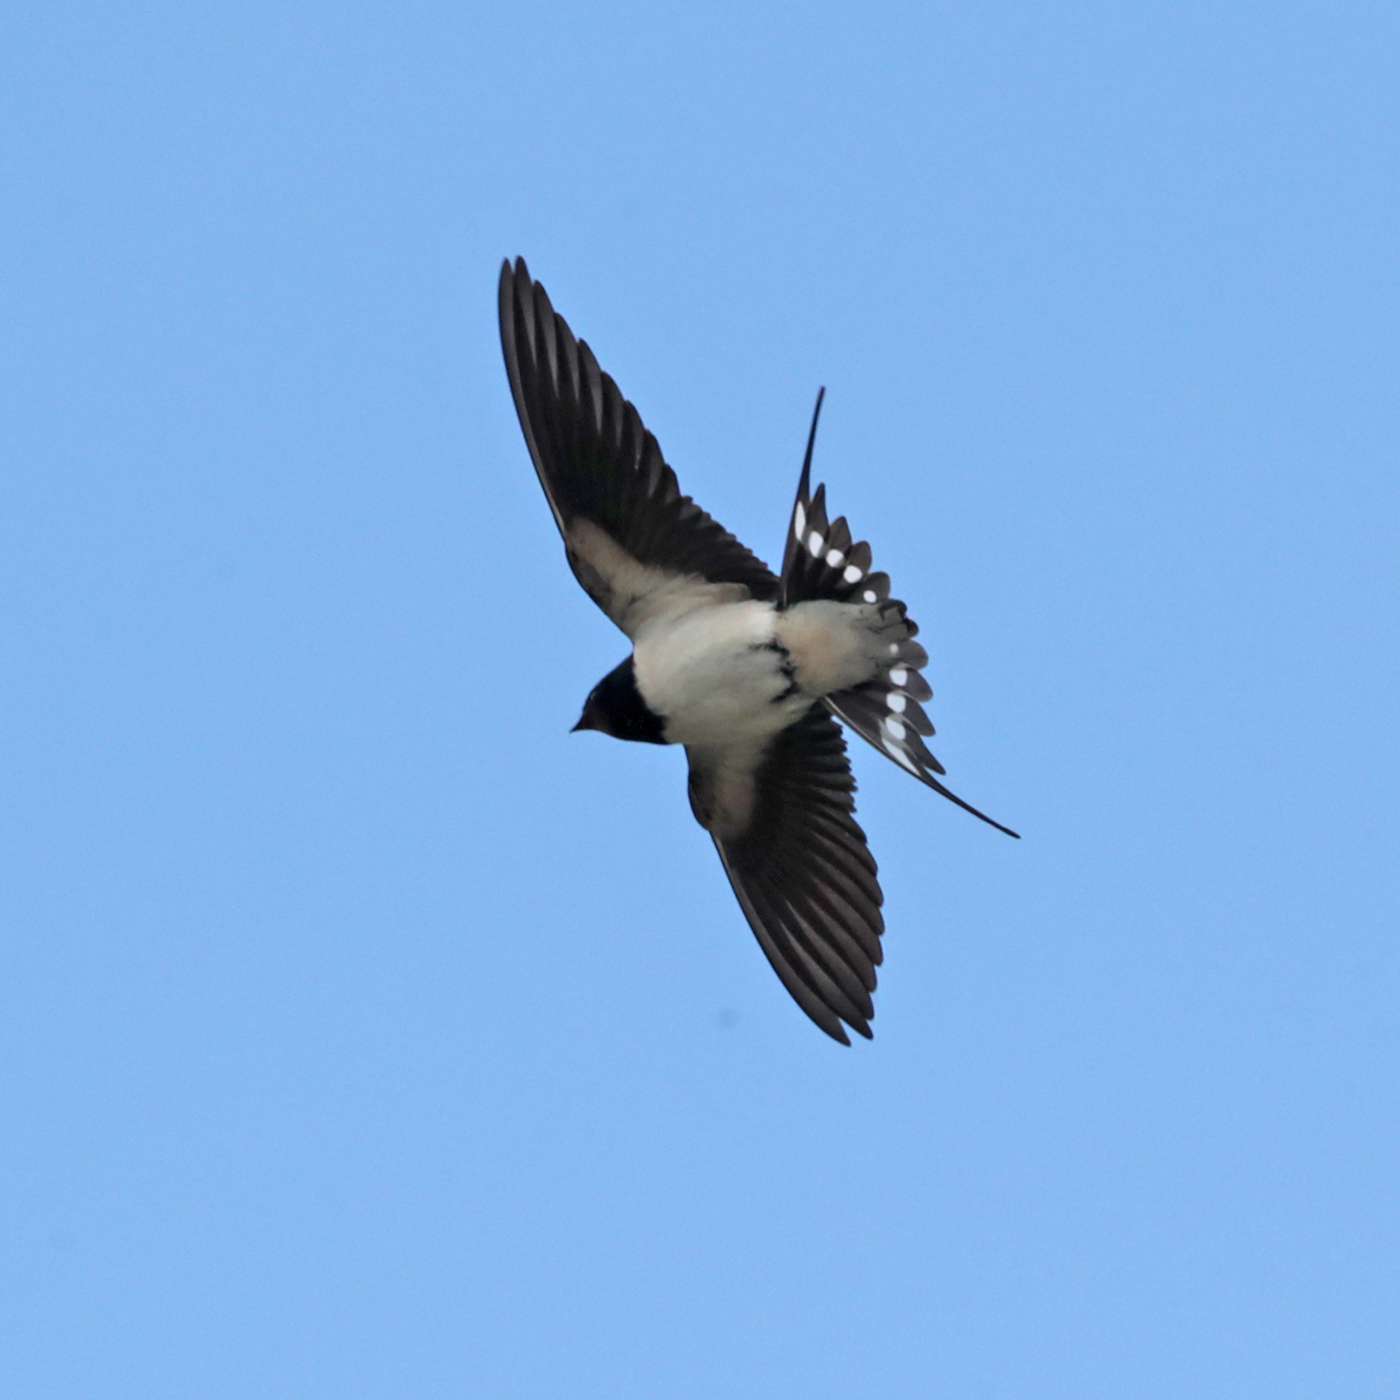 Swallow by Steve Hopper at South Brent